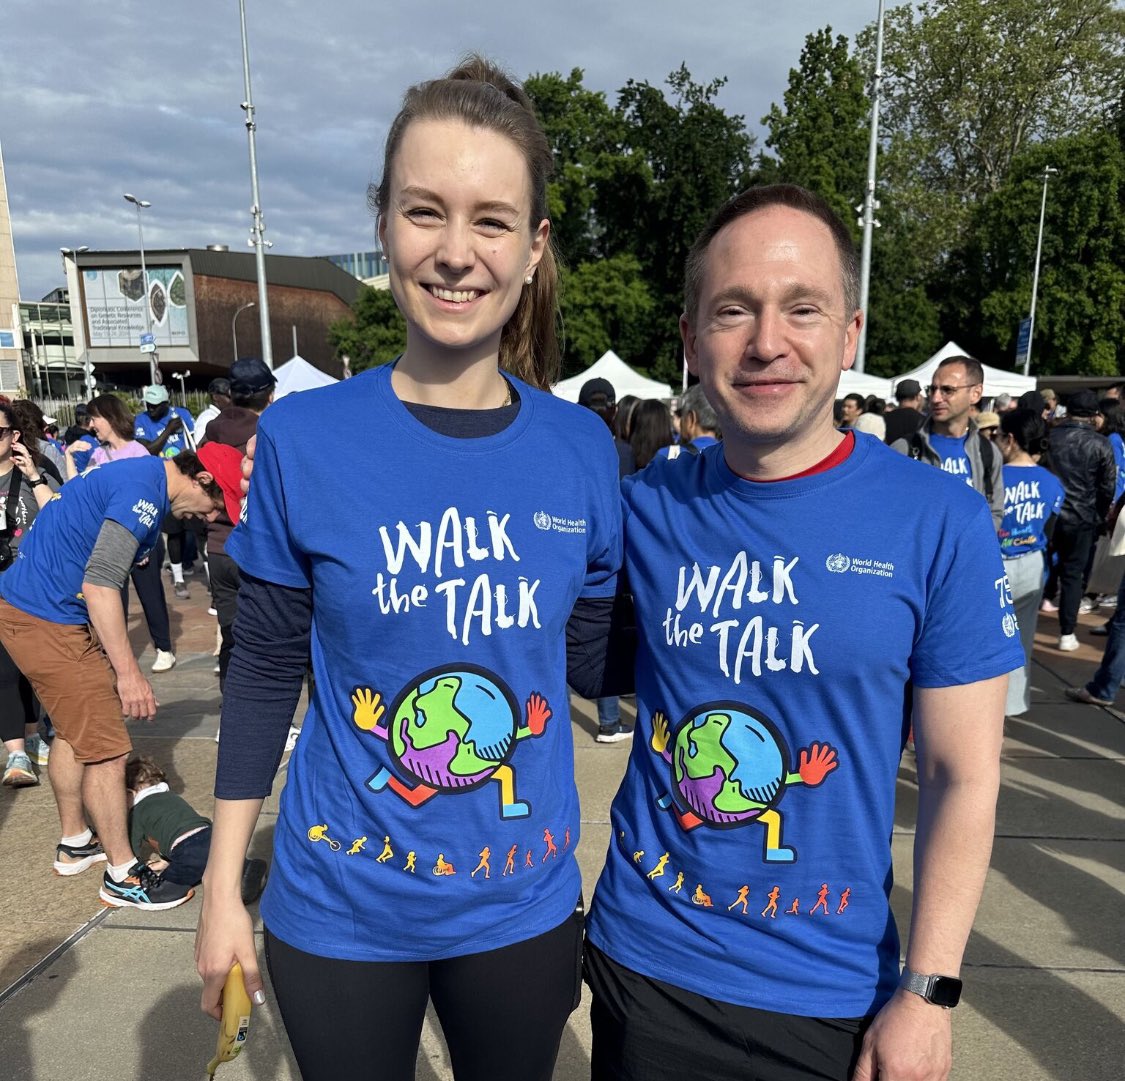 Team World Health Summit is ready for this year‘s World Health Assembly #WHA77 in Geneva. Our CEO Carsten Schicker and Strategic Engagement Director Frederike Sontag at today’s #WalkTheTalk promoting #HealthForAll. Thank you @WHO for having us!